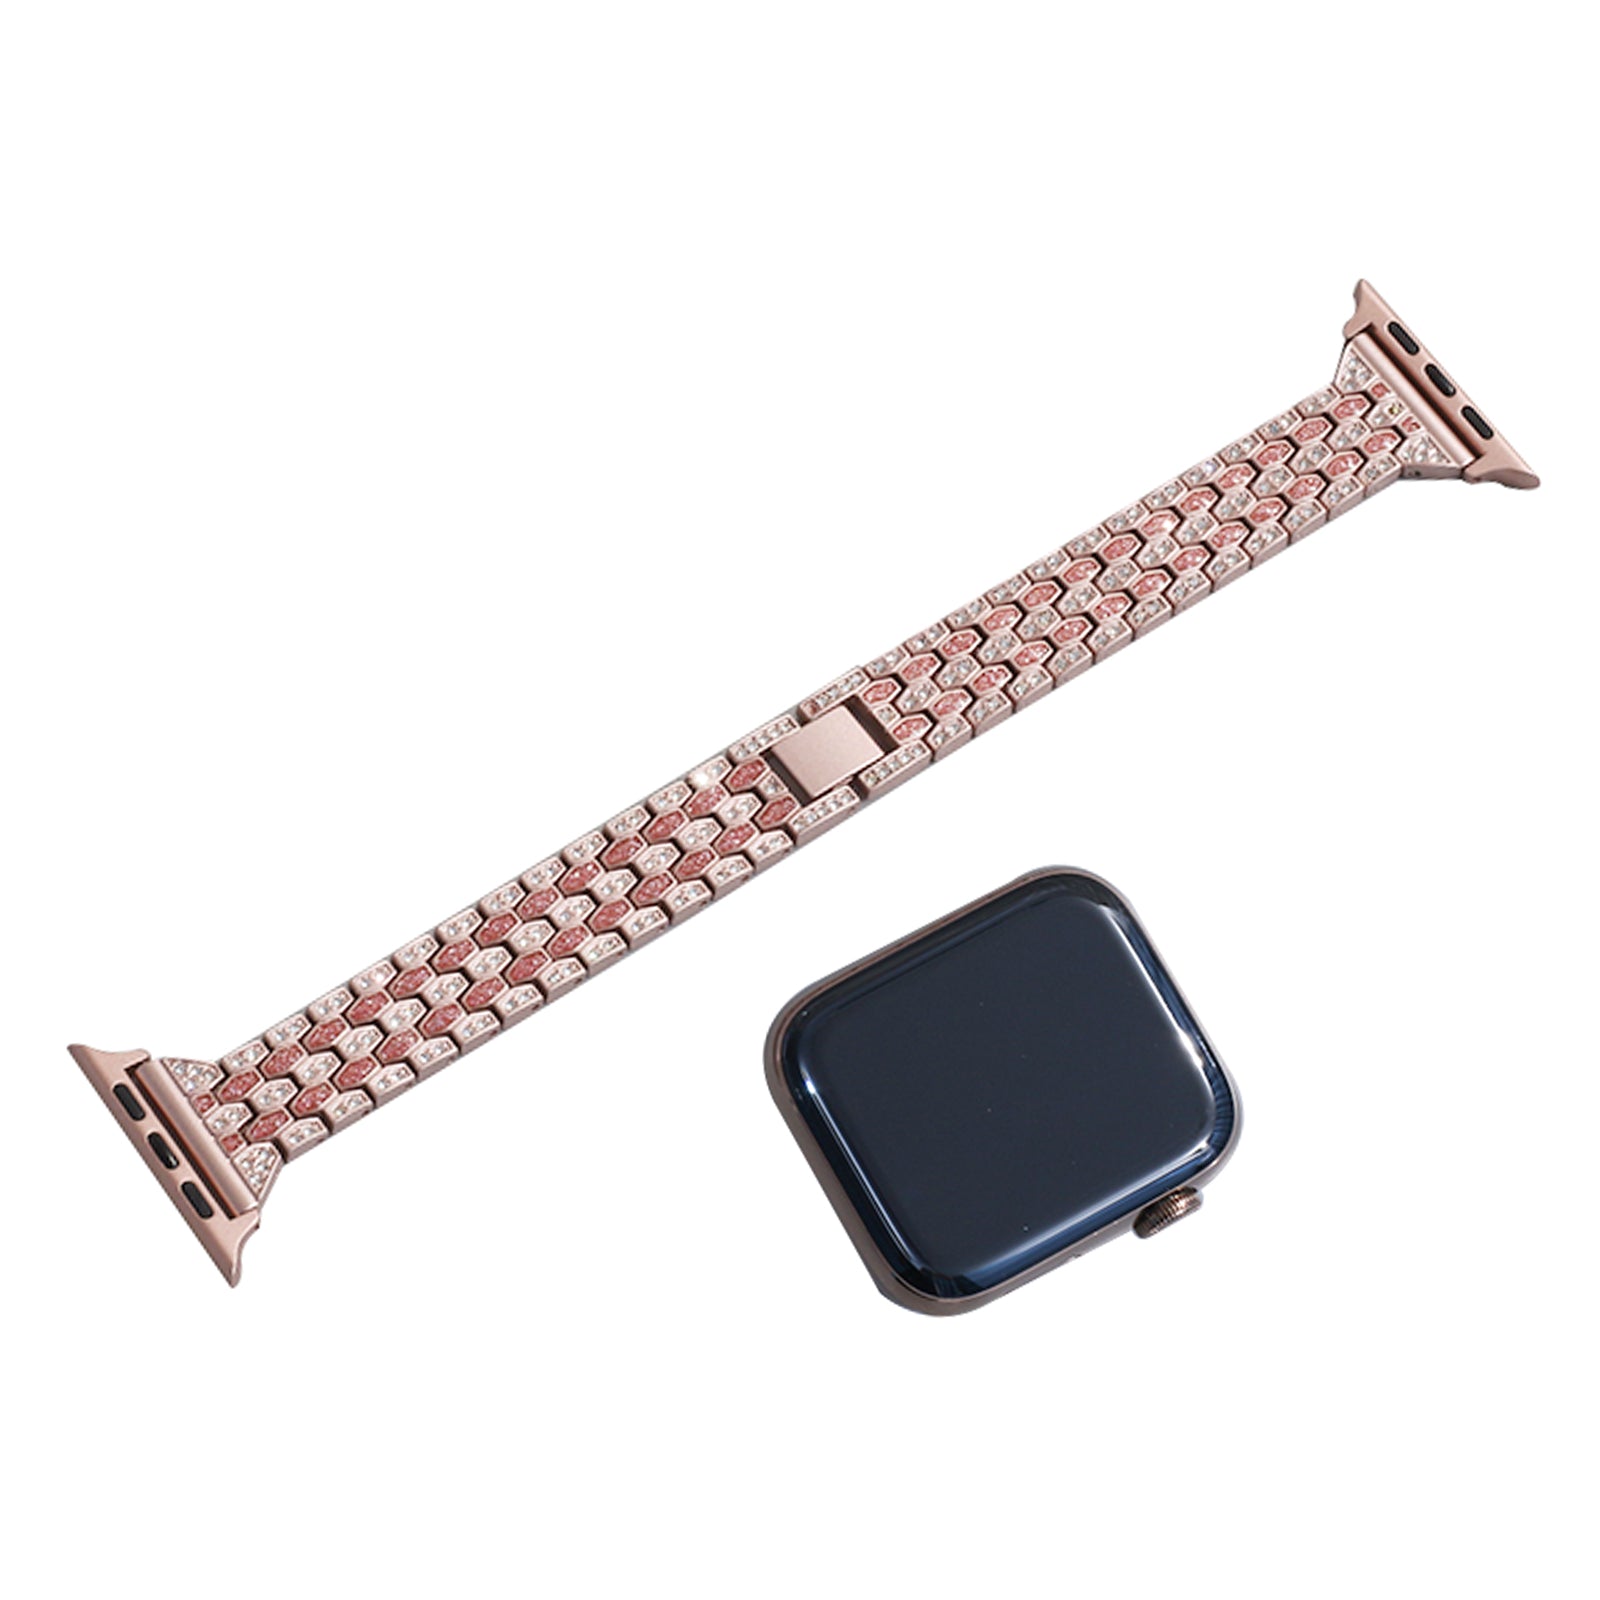 GAHOGA Compatible with Apple Watch Band , Women Jewelry Bling Diamond Rhinestone Replacement Metal Strap for iWatch Series 7/6/5/4/3/2/1/SE